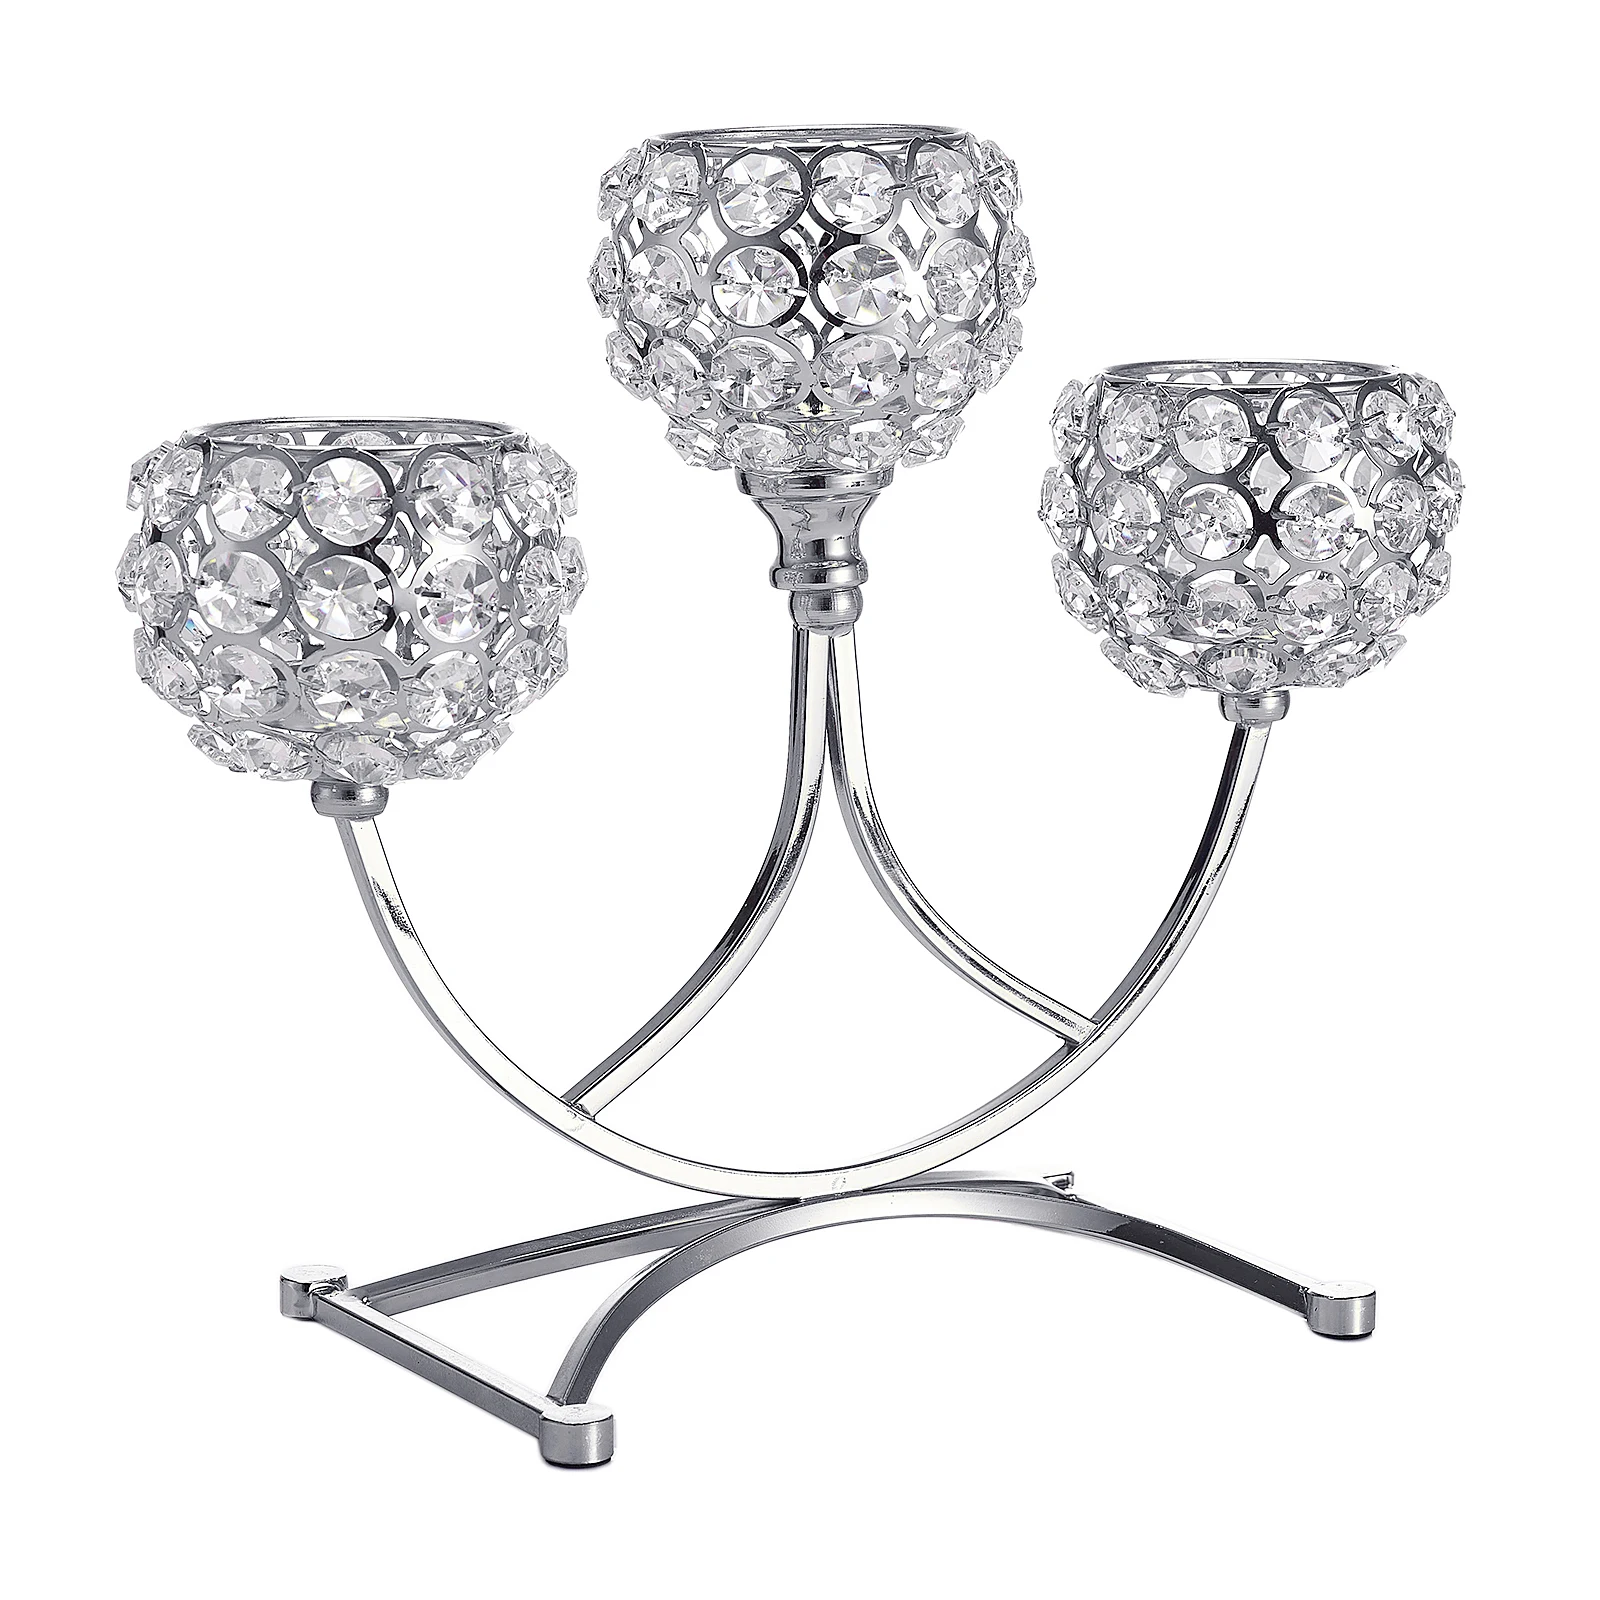 3-Arm Silver Crystal Candle Holder Dining Table Candlestick Candelabra